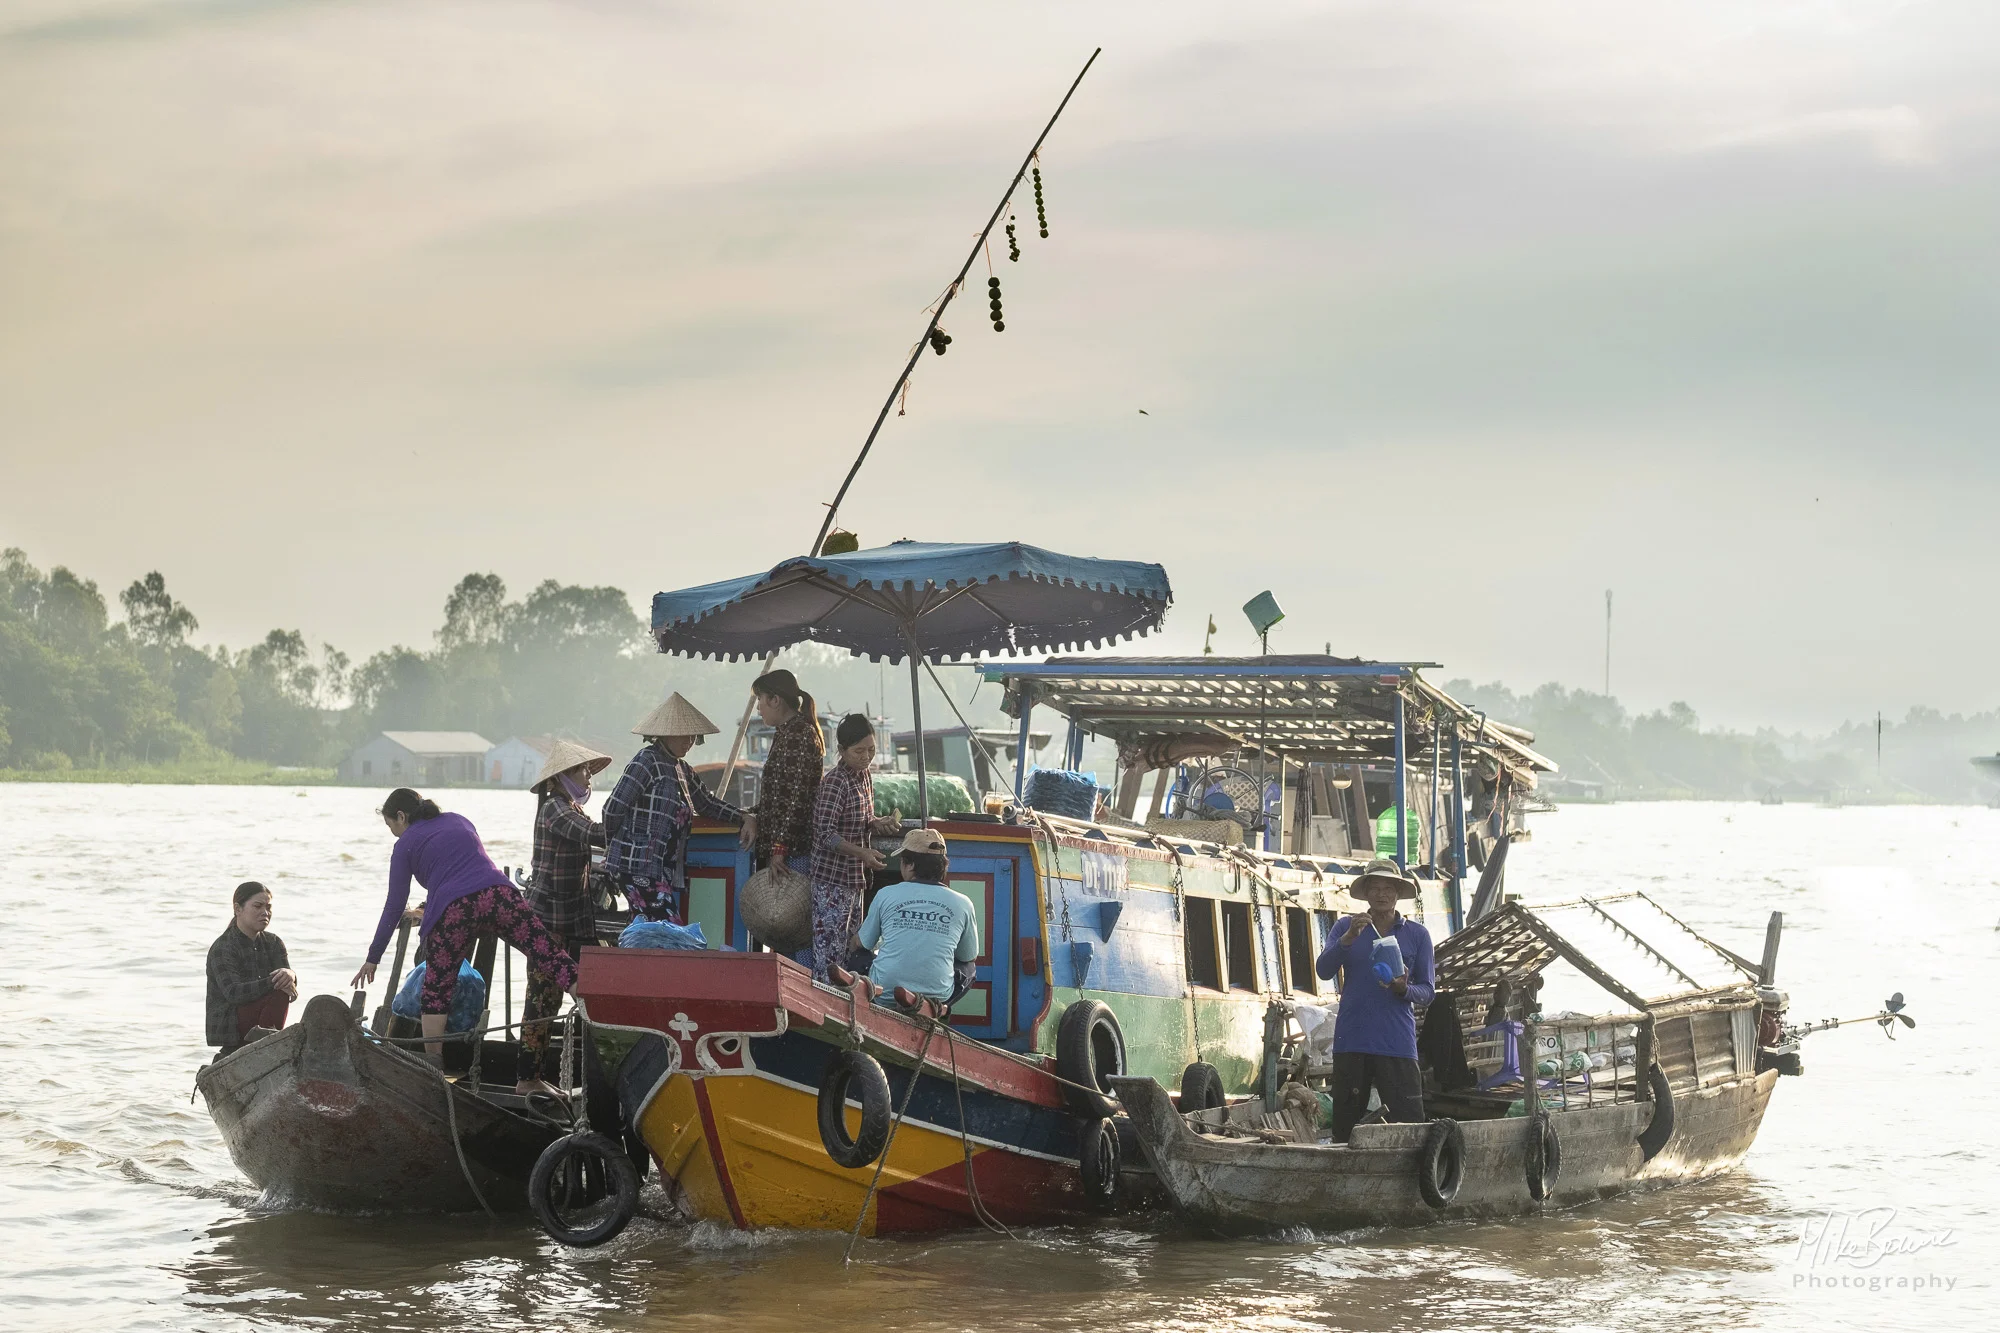 Three trader boats on Mekong rover at Châu Đốc floating market, Vietnam